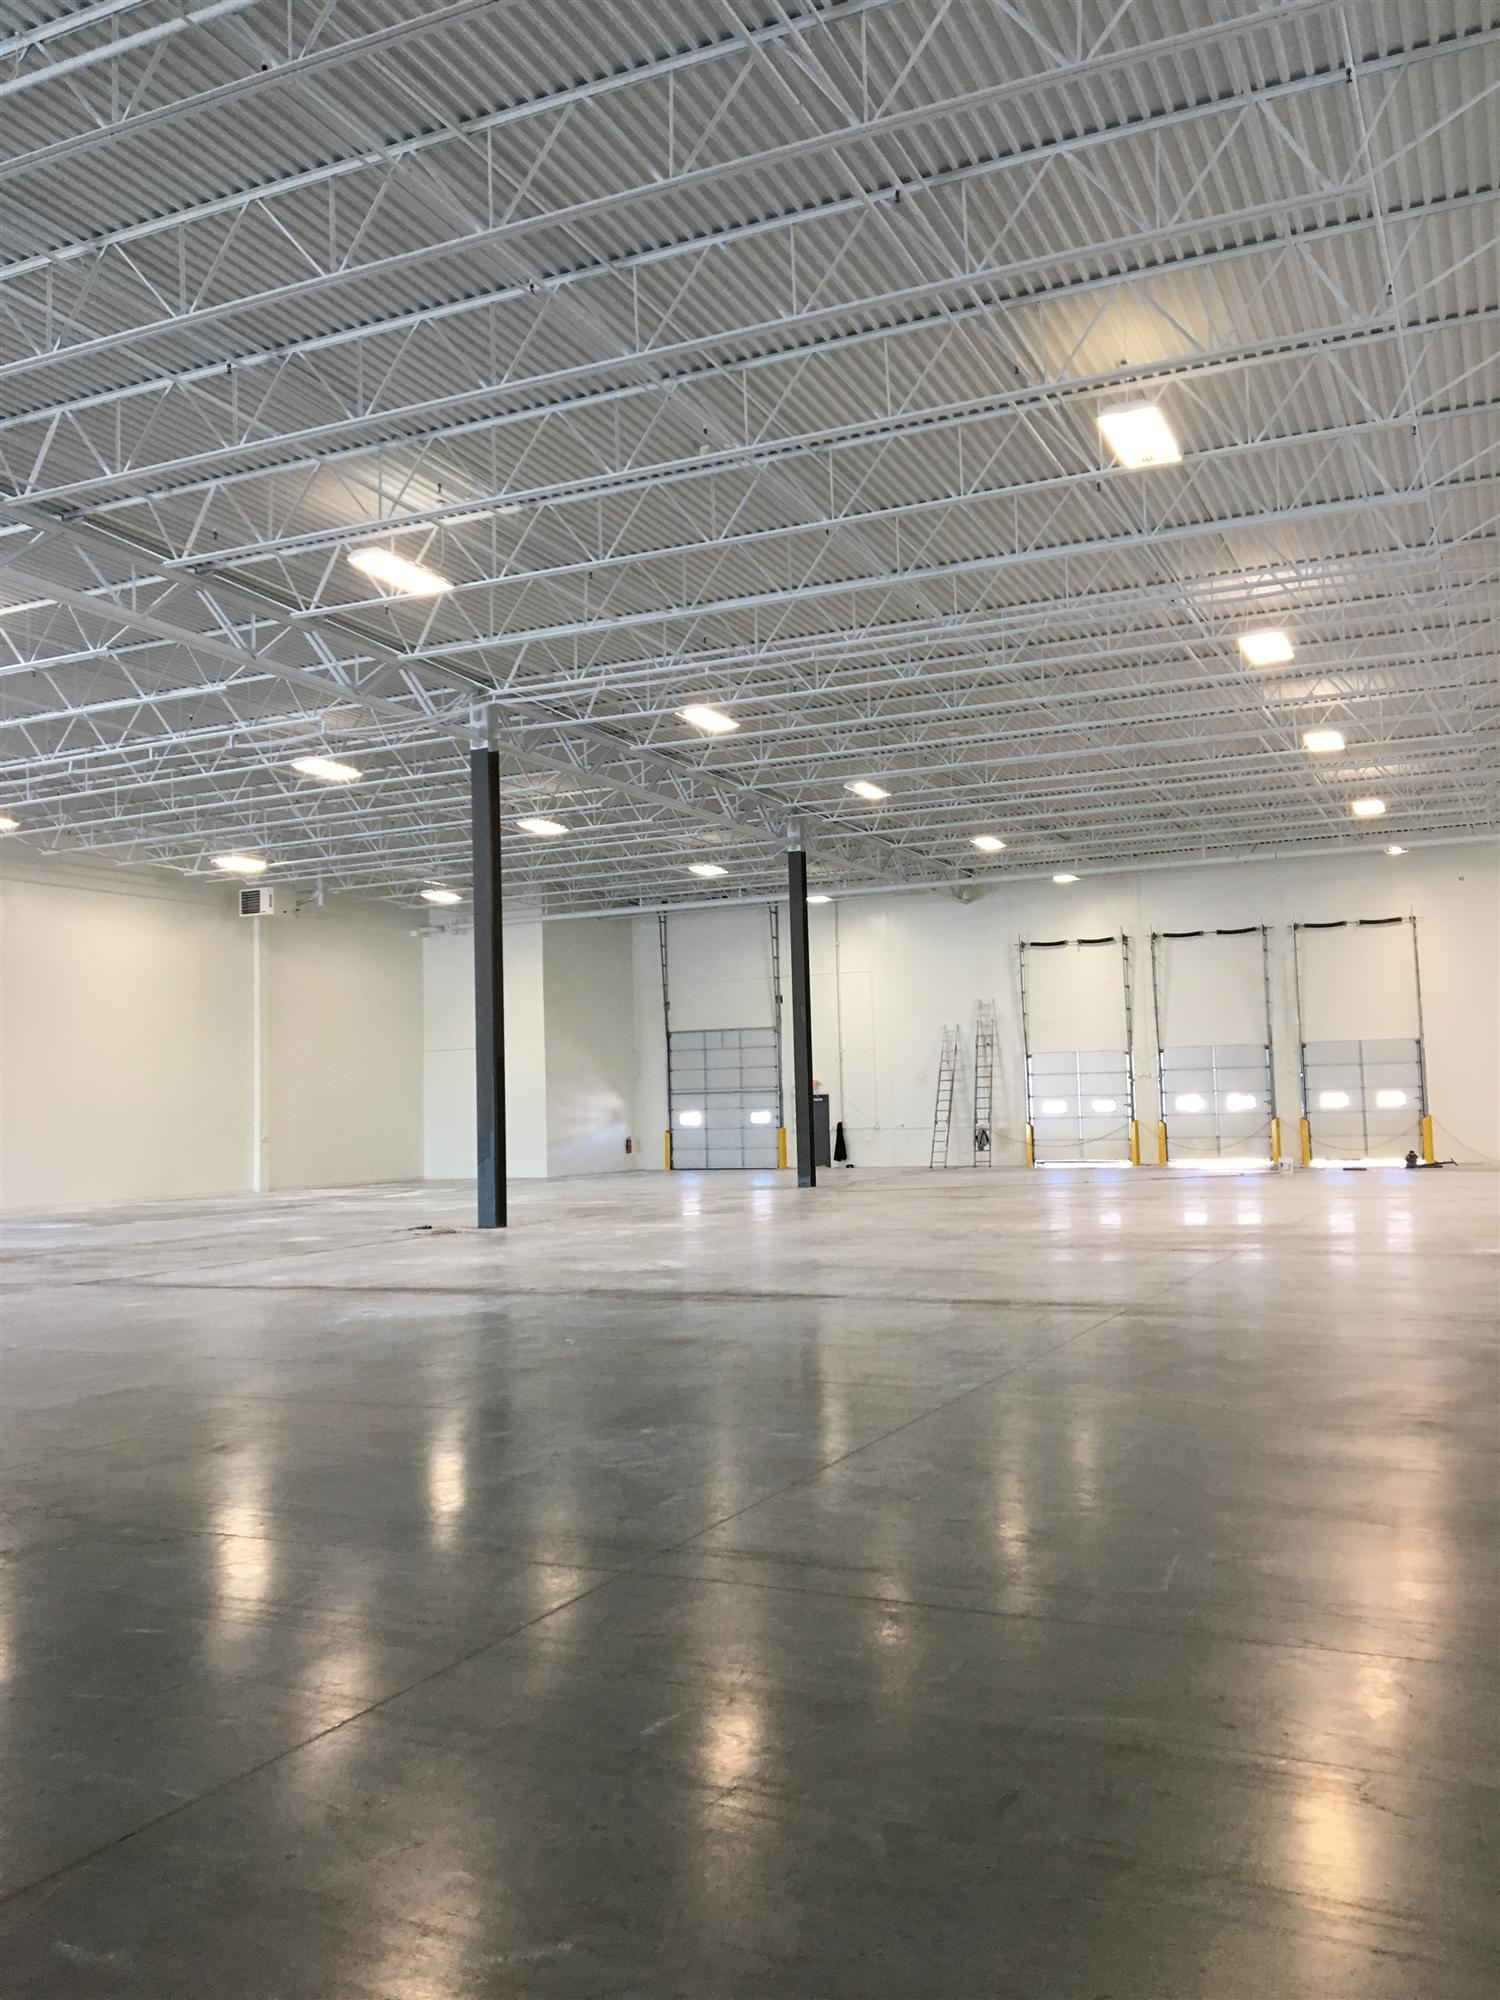 Industrial painting contractors completed the interior of this industrial building in Racine WI